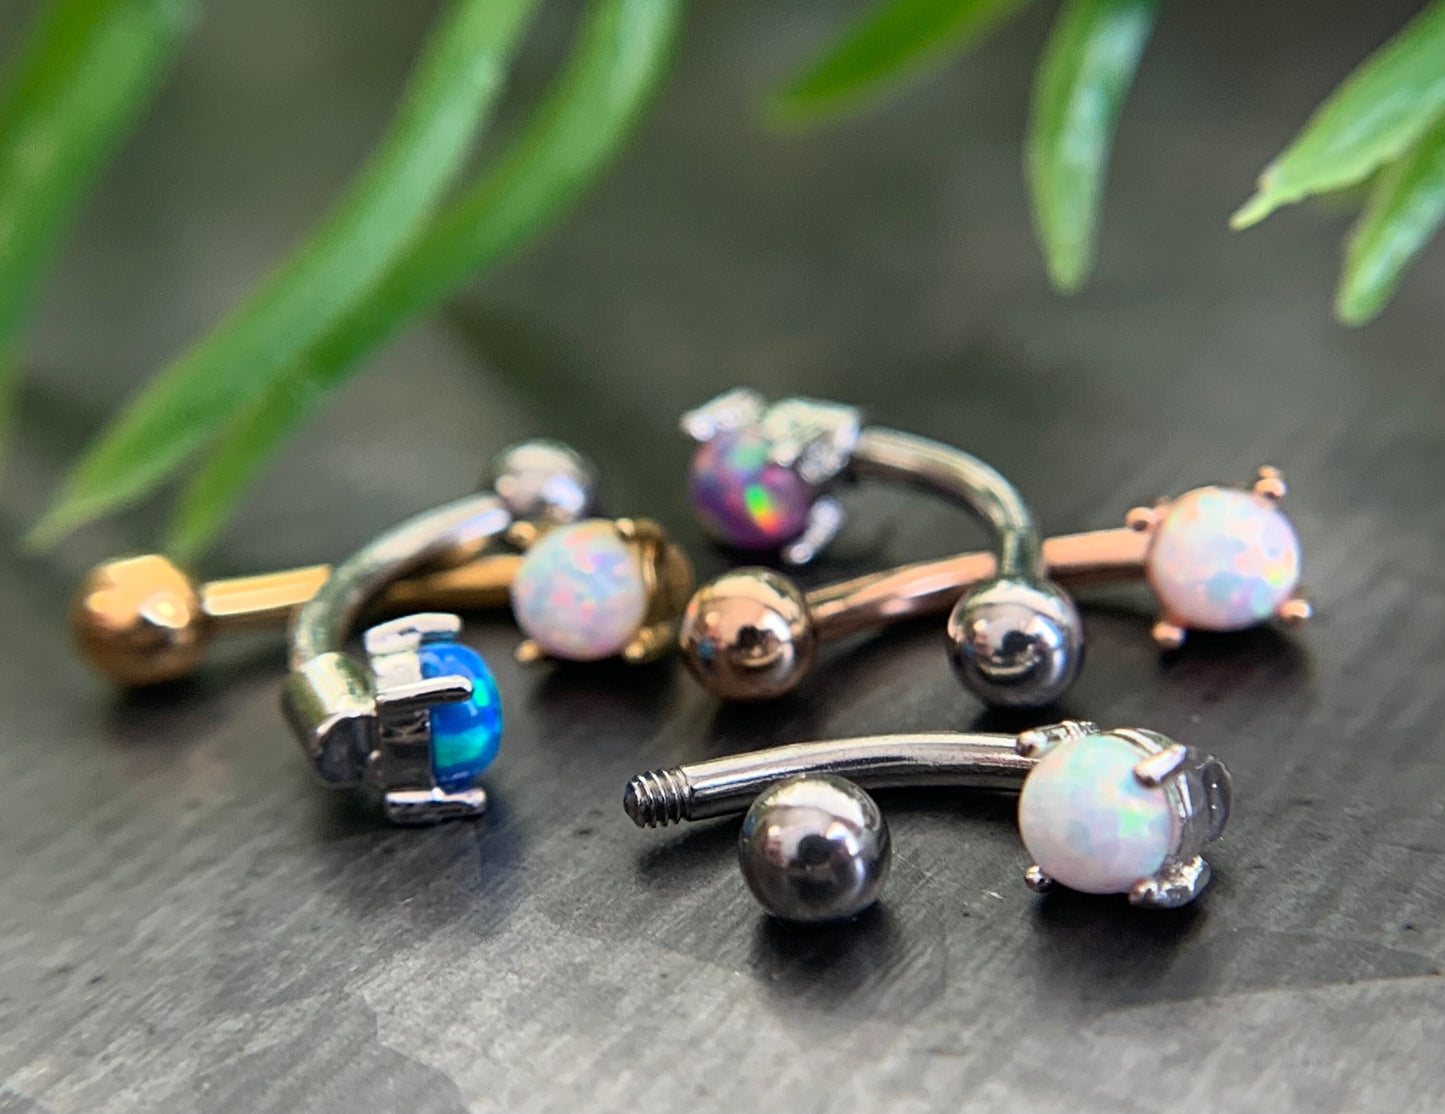 1 Piece Stunning Prong Set 3mm Opal Curved Barbell Eyebrow Ring - 16g - Blue, Purple, White, Gold and Rose Gold Available!